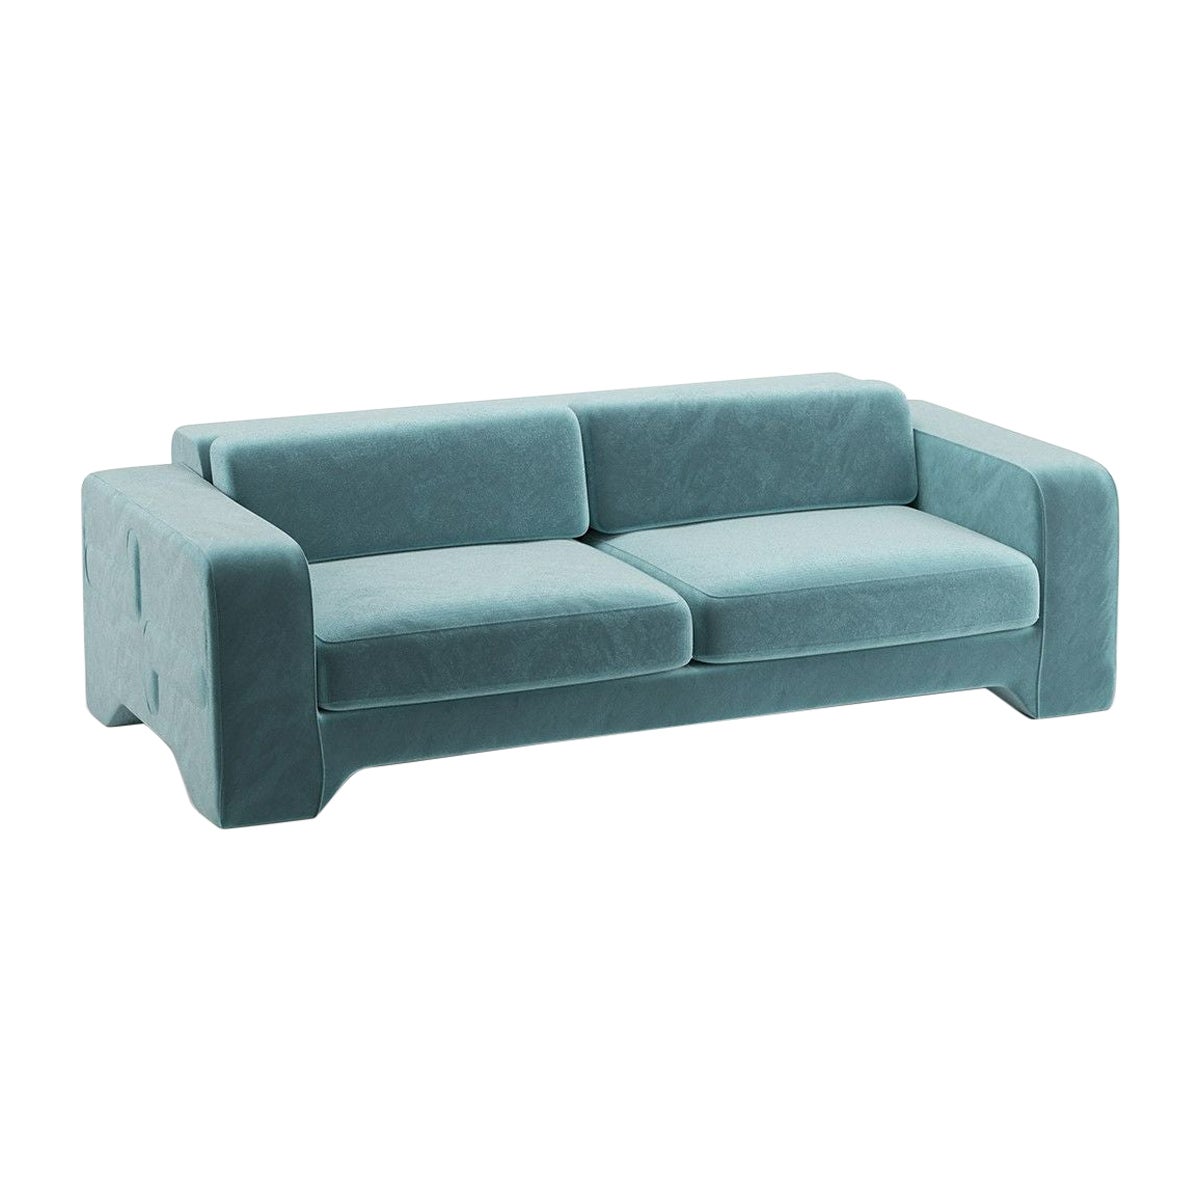 Popus Editions Giovanna 4 Seater Sofa in Blue Verone Velvet Upholstery For Sale